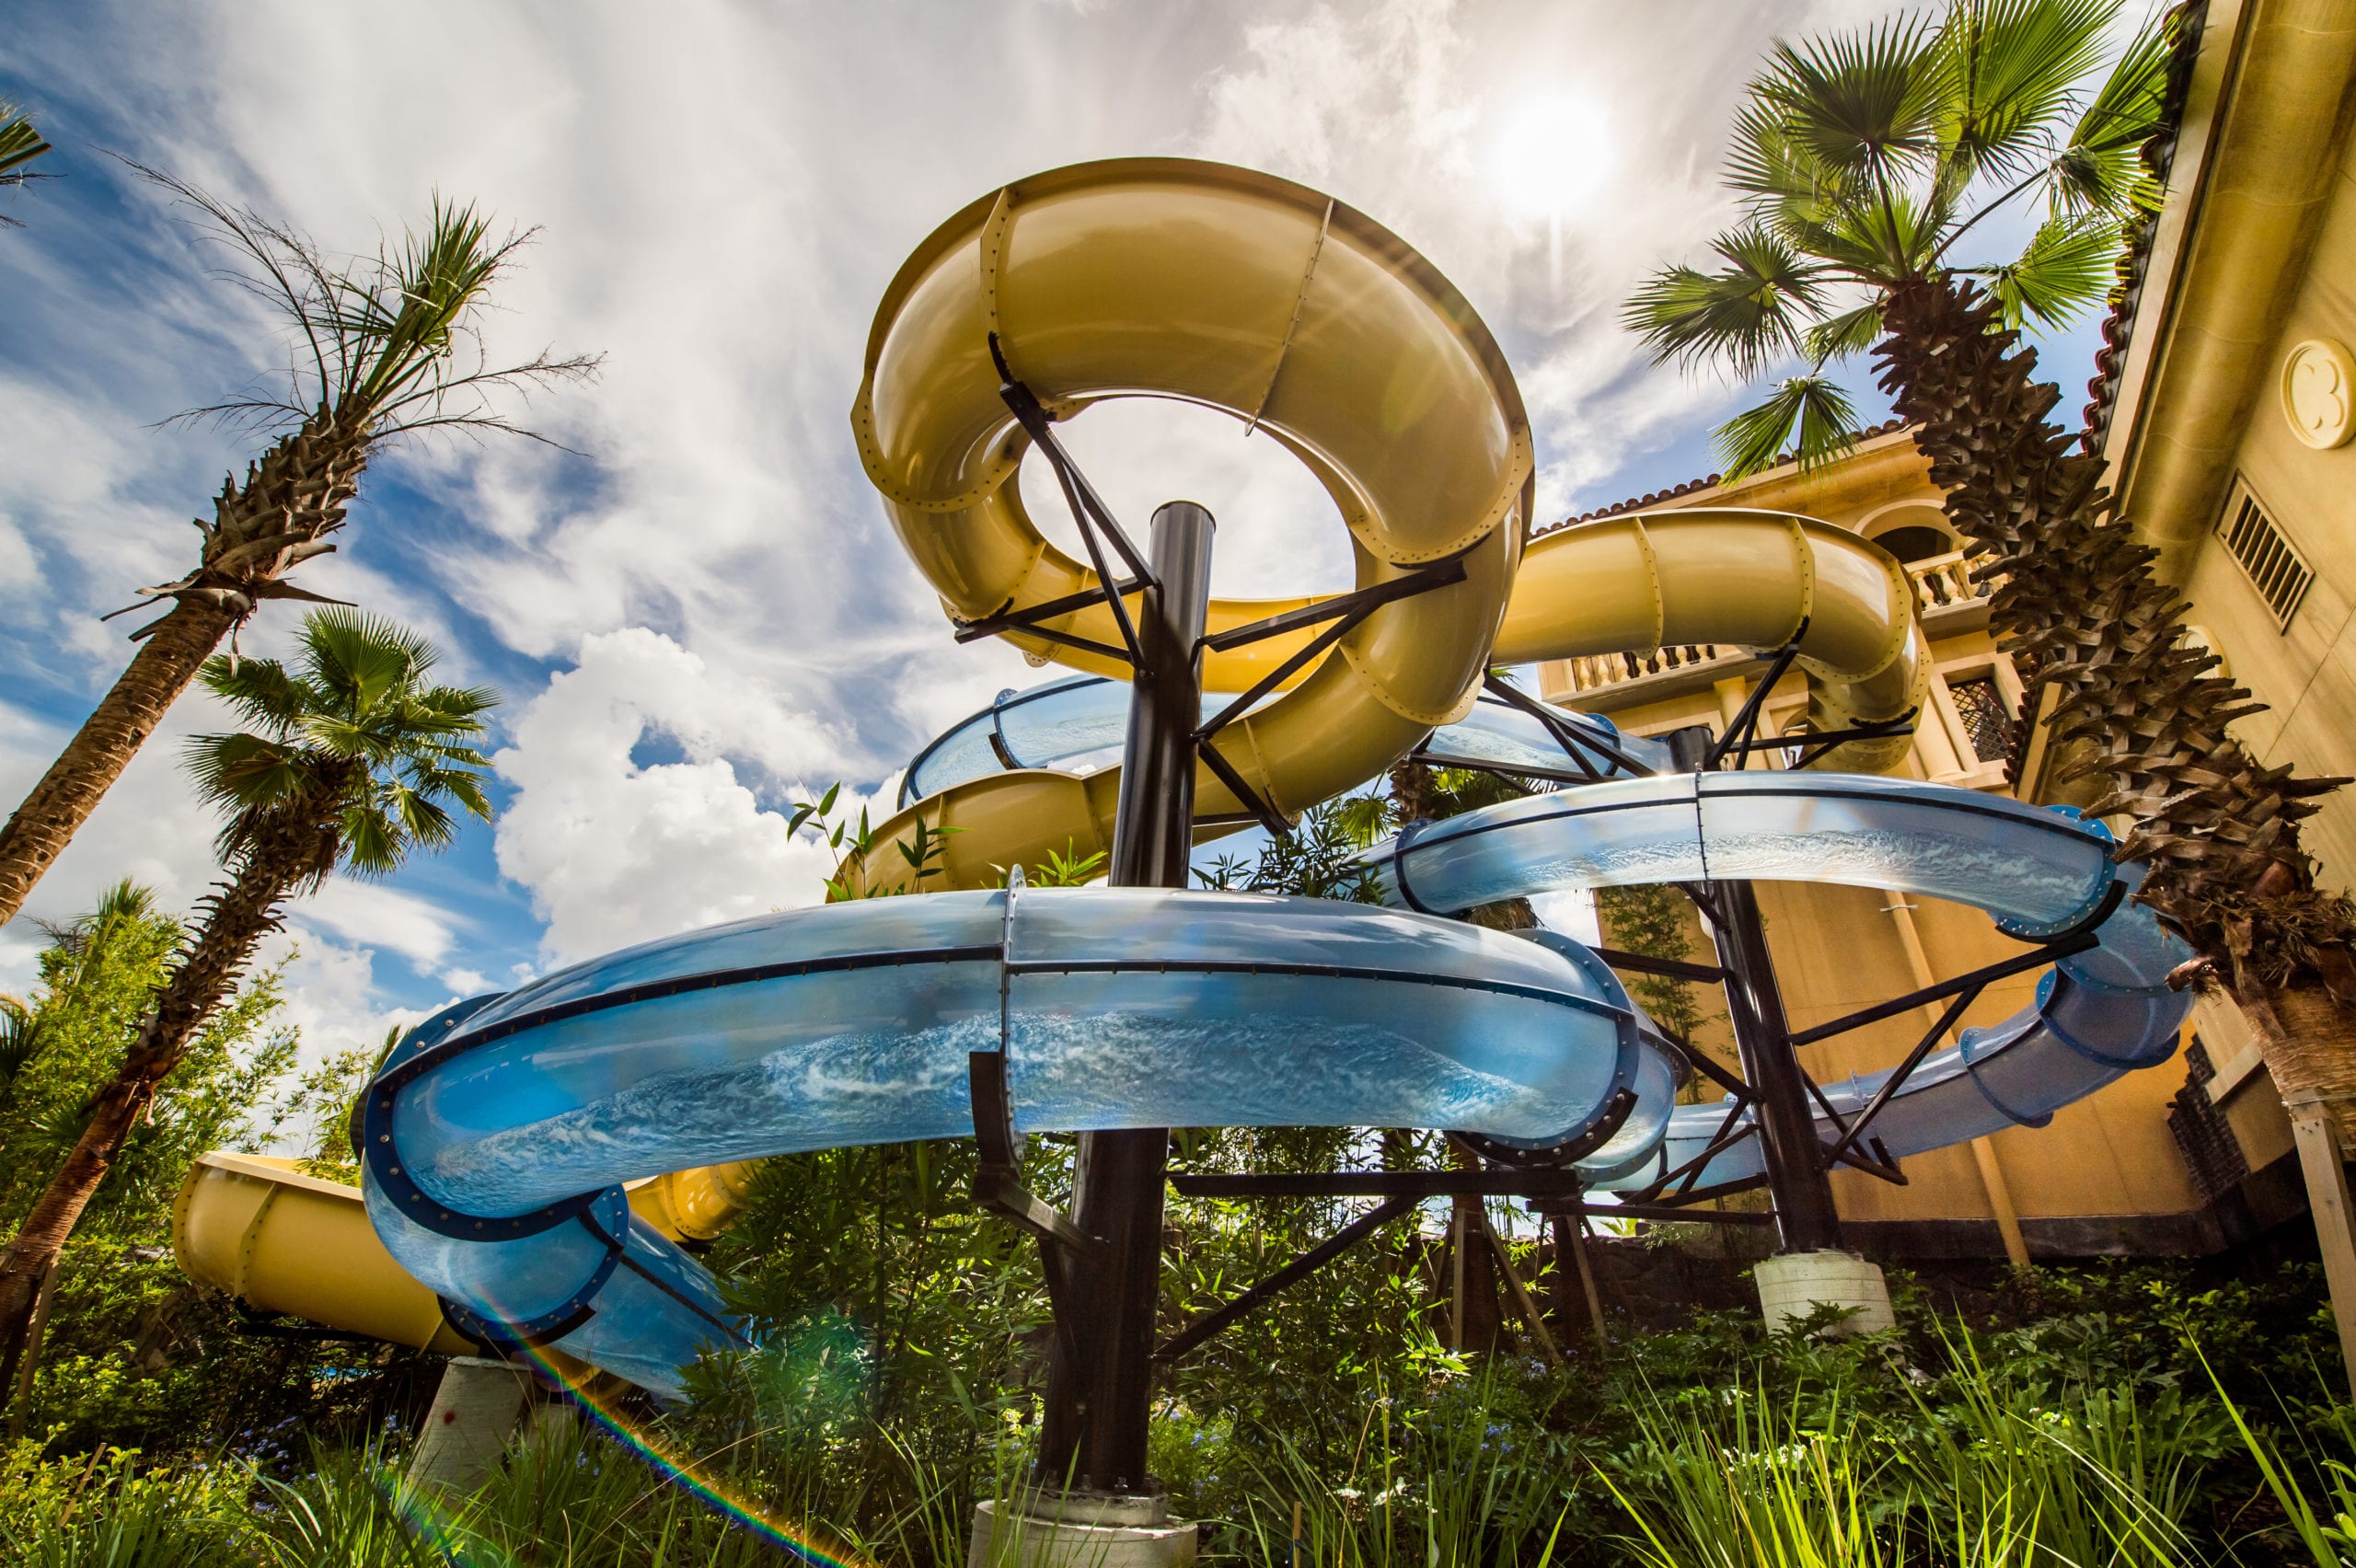 Four Seasons Building with a water slide nearby surrounded by palm trees